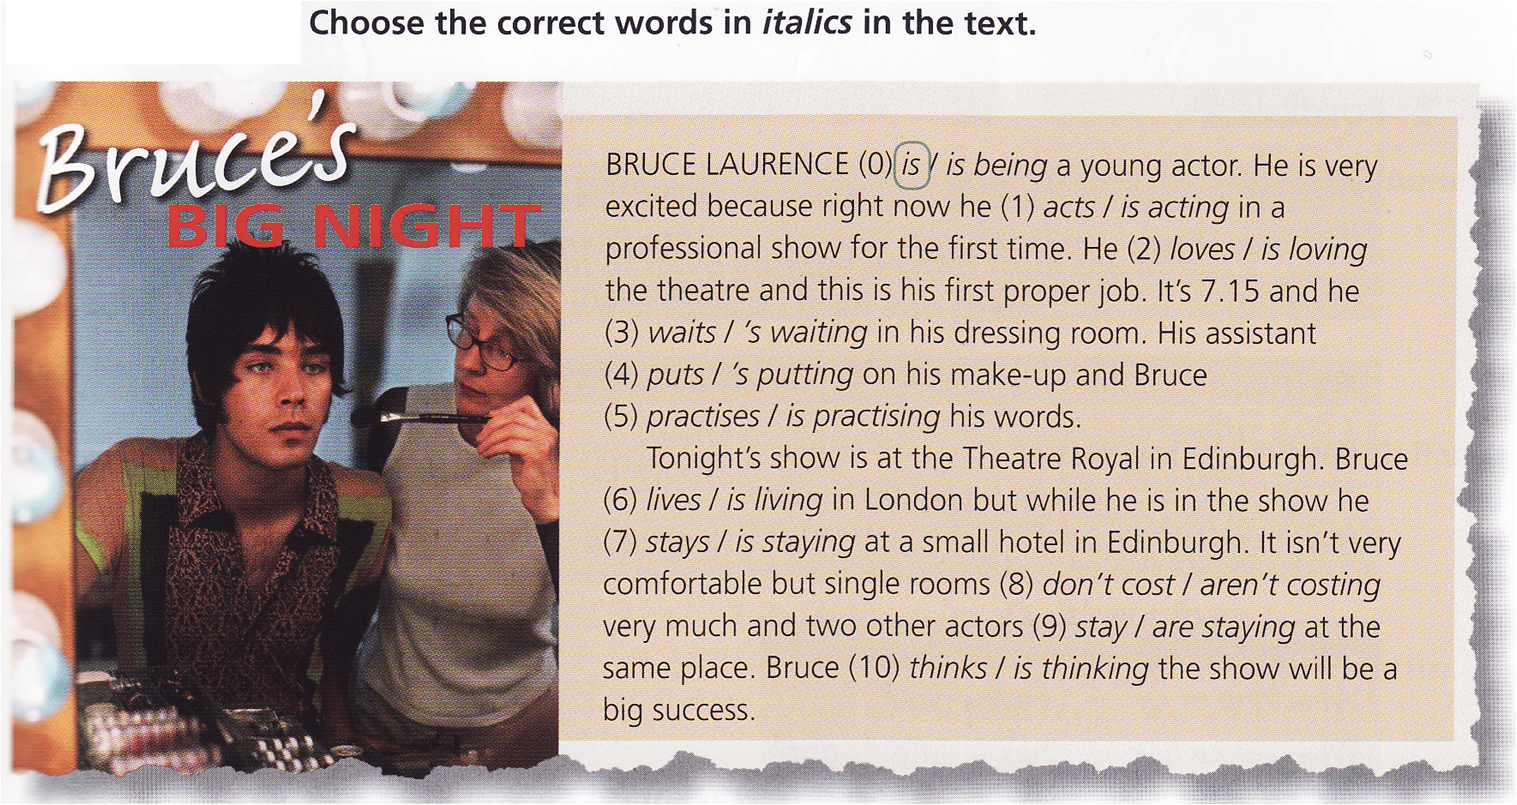 Брюс перевод. Choose the correct Words in italics. Choose the correct Words in italics in the text Bruce Laurence ответы. Word in italics. Choose the correct Words in italics in the text Bruce Laurence is a young actor. He is very.